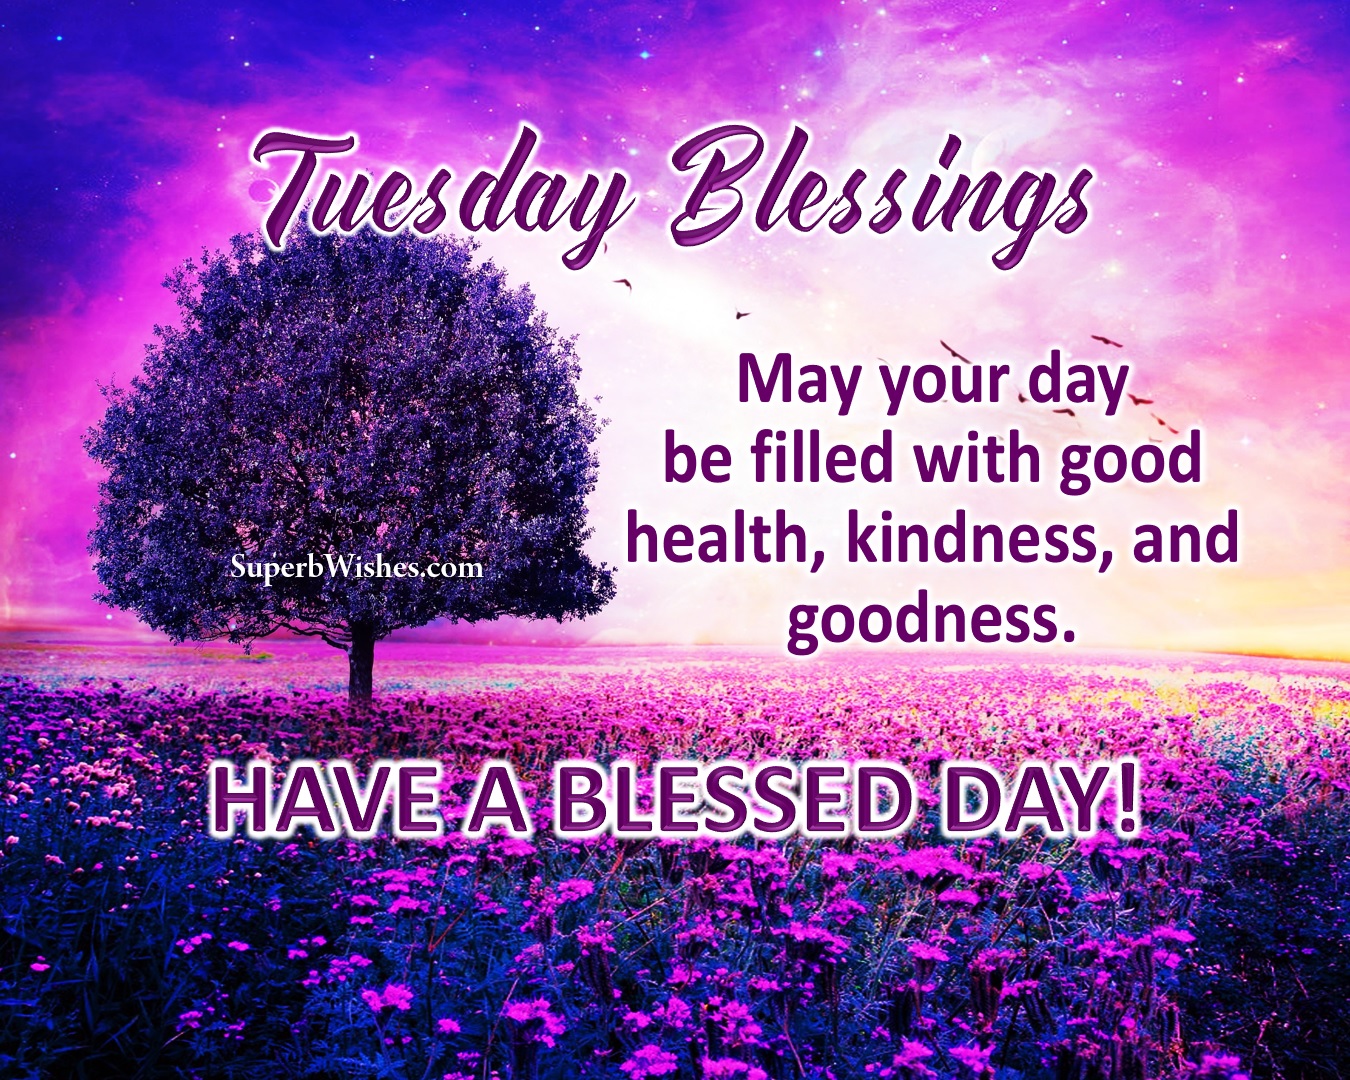 Have a blessed Tuesday images and quotes. Superbwishes.com